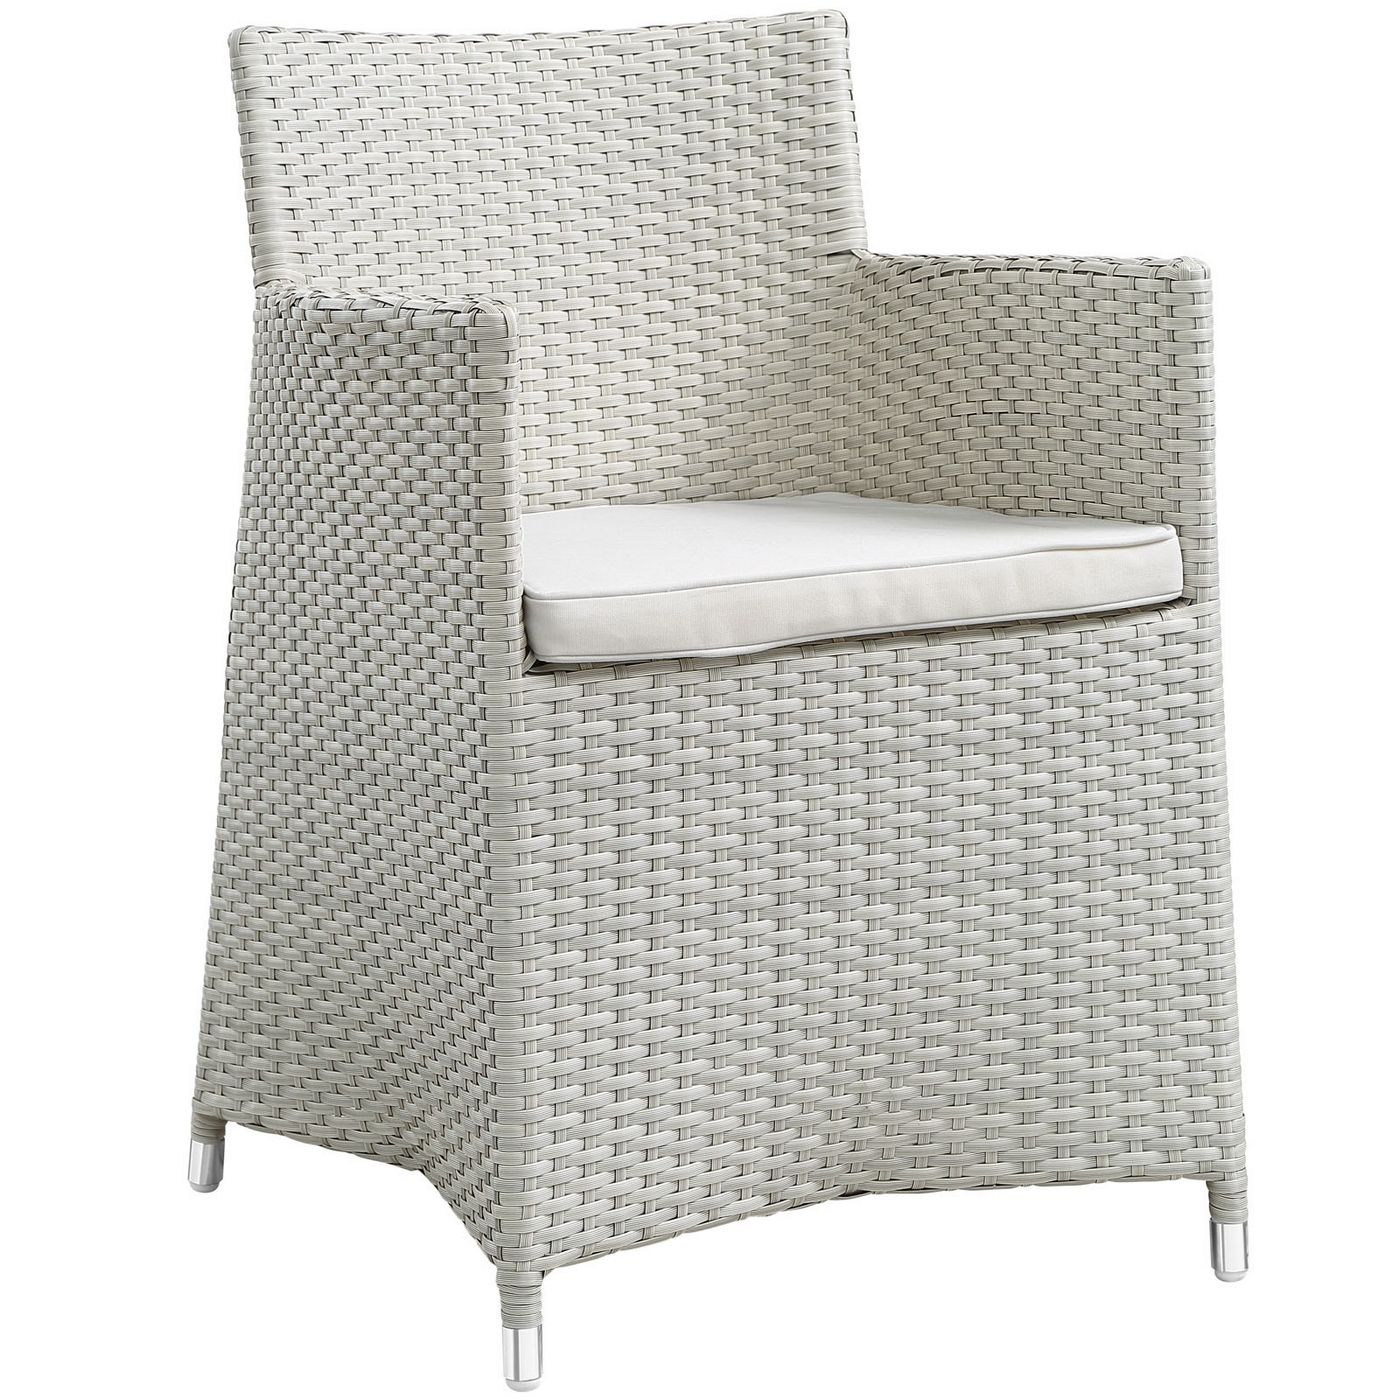 Junction Modern Rattan Weaved Outdoor Patio Dining Armchair W/ Cushion Inside Outdoor Armchairs (View 4 of 15)